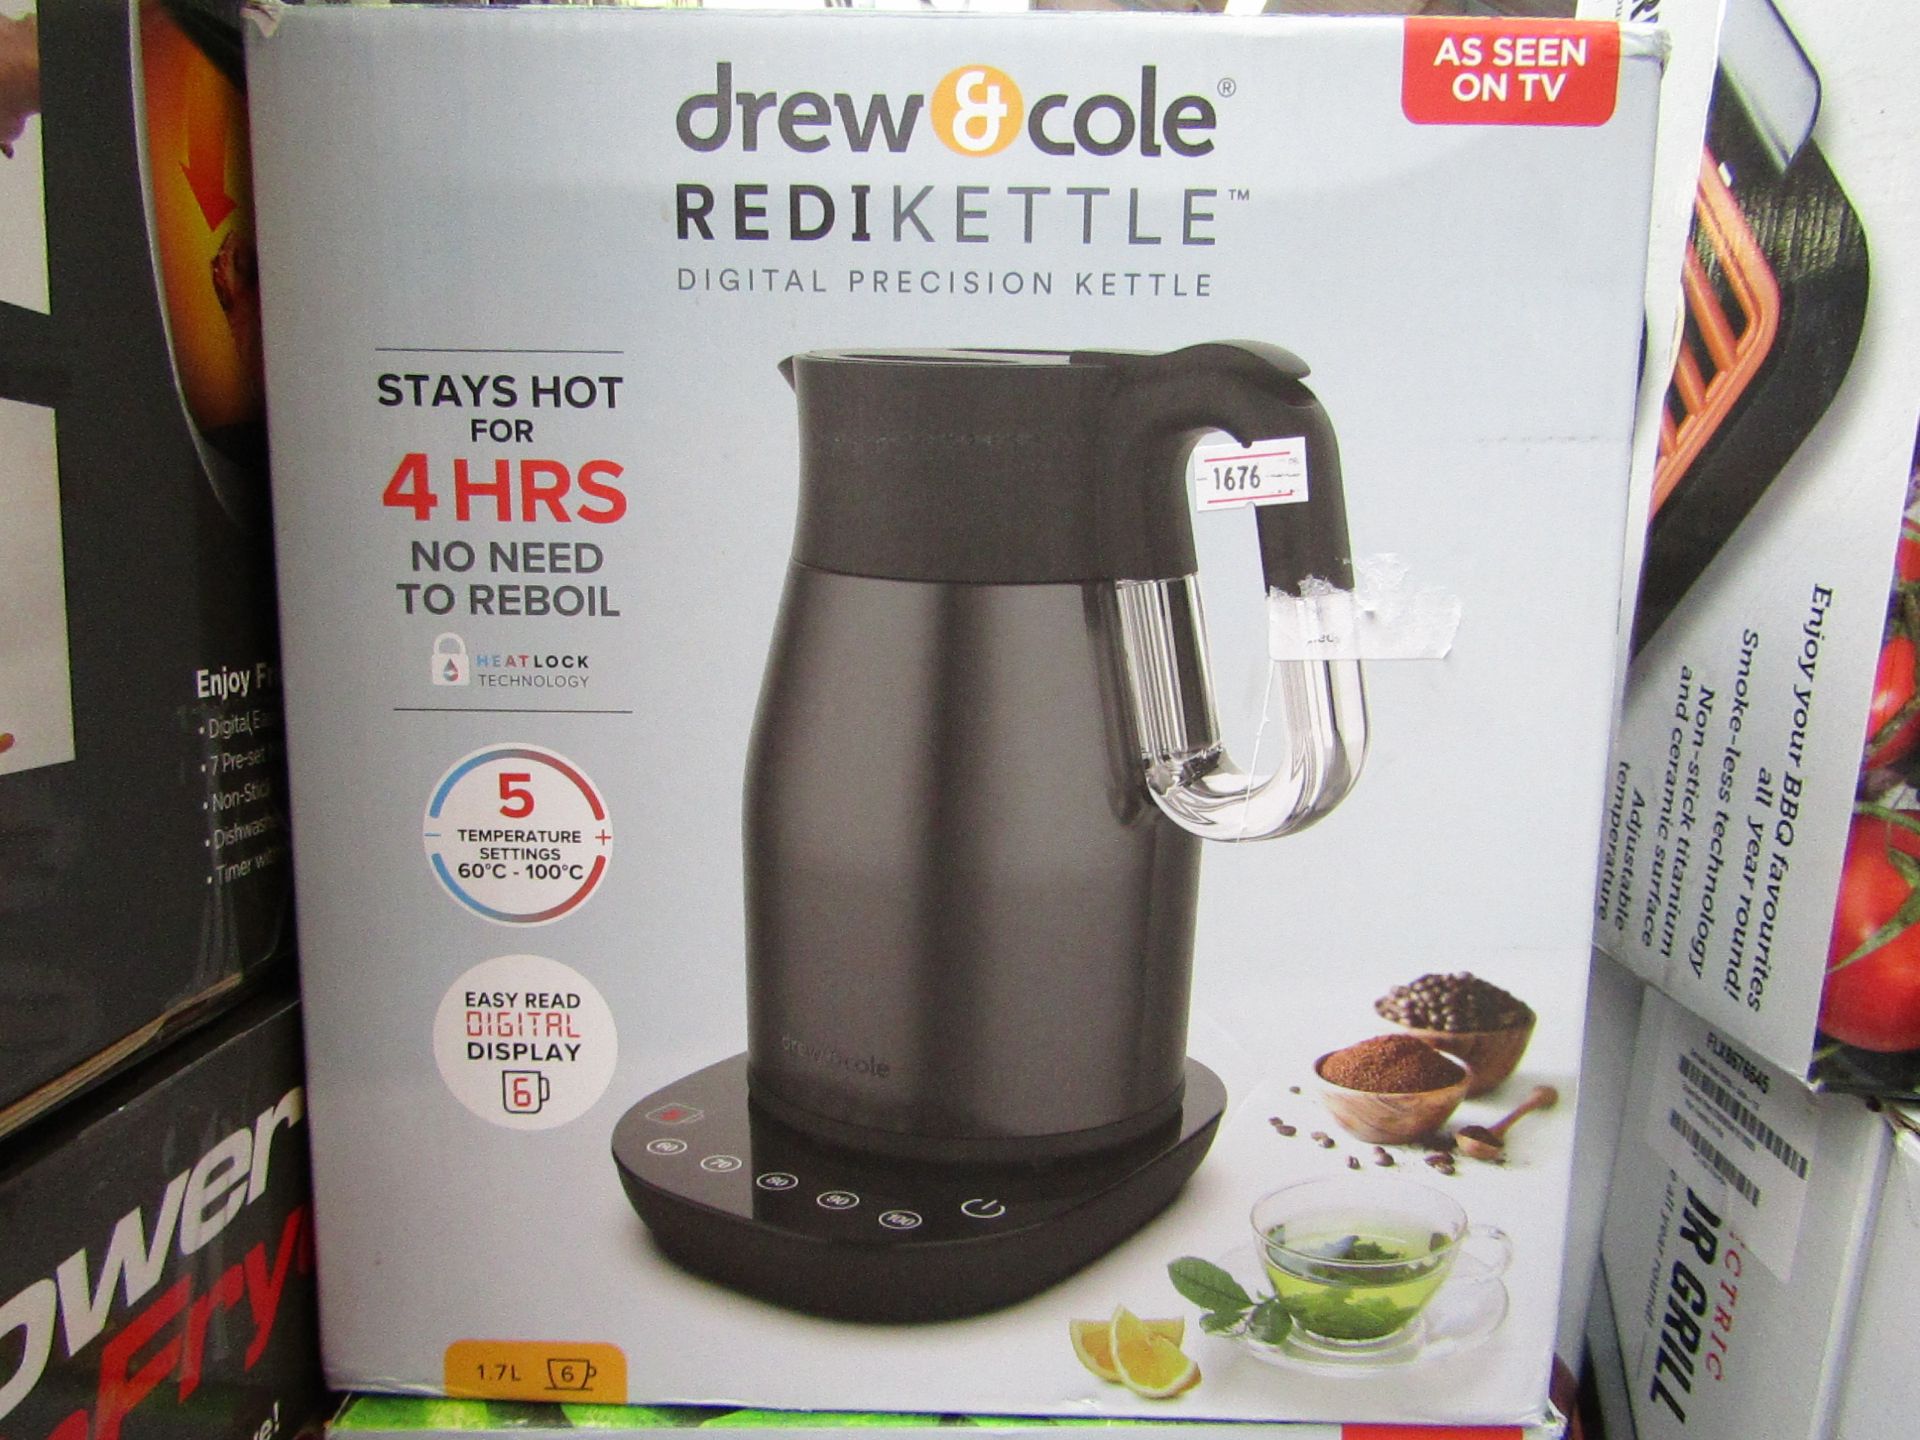 | 1X | DREW & COLE REDI KETTLE 1.7L | REFURBISHED AND BOXED | NO ONLINE RE-SALE | SKU C5060541513570